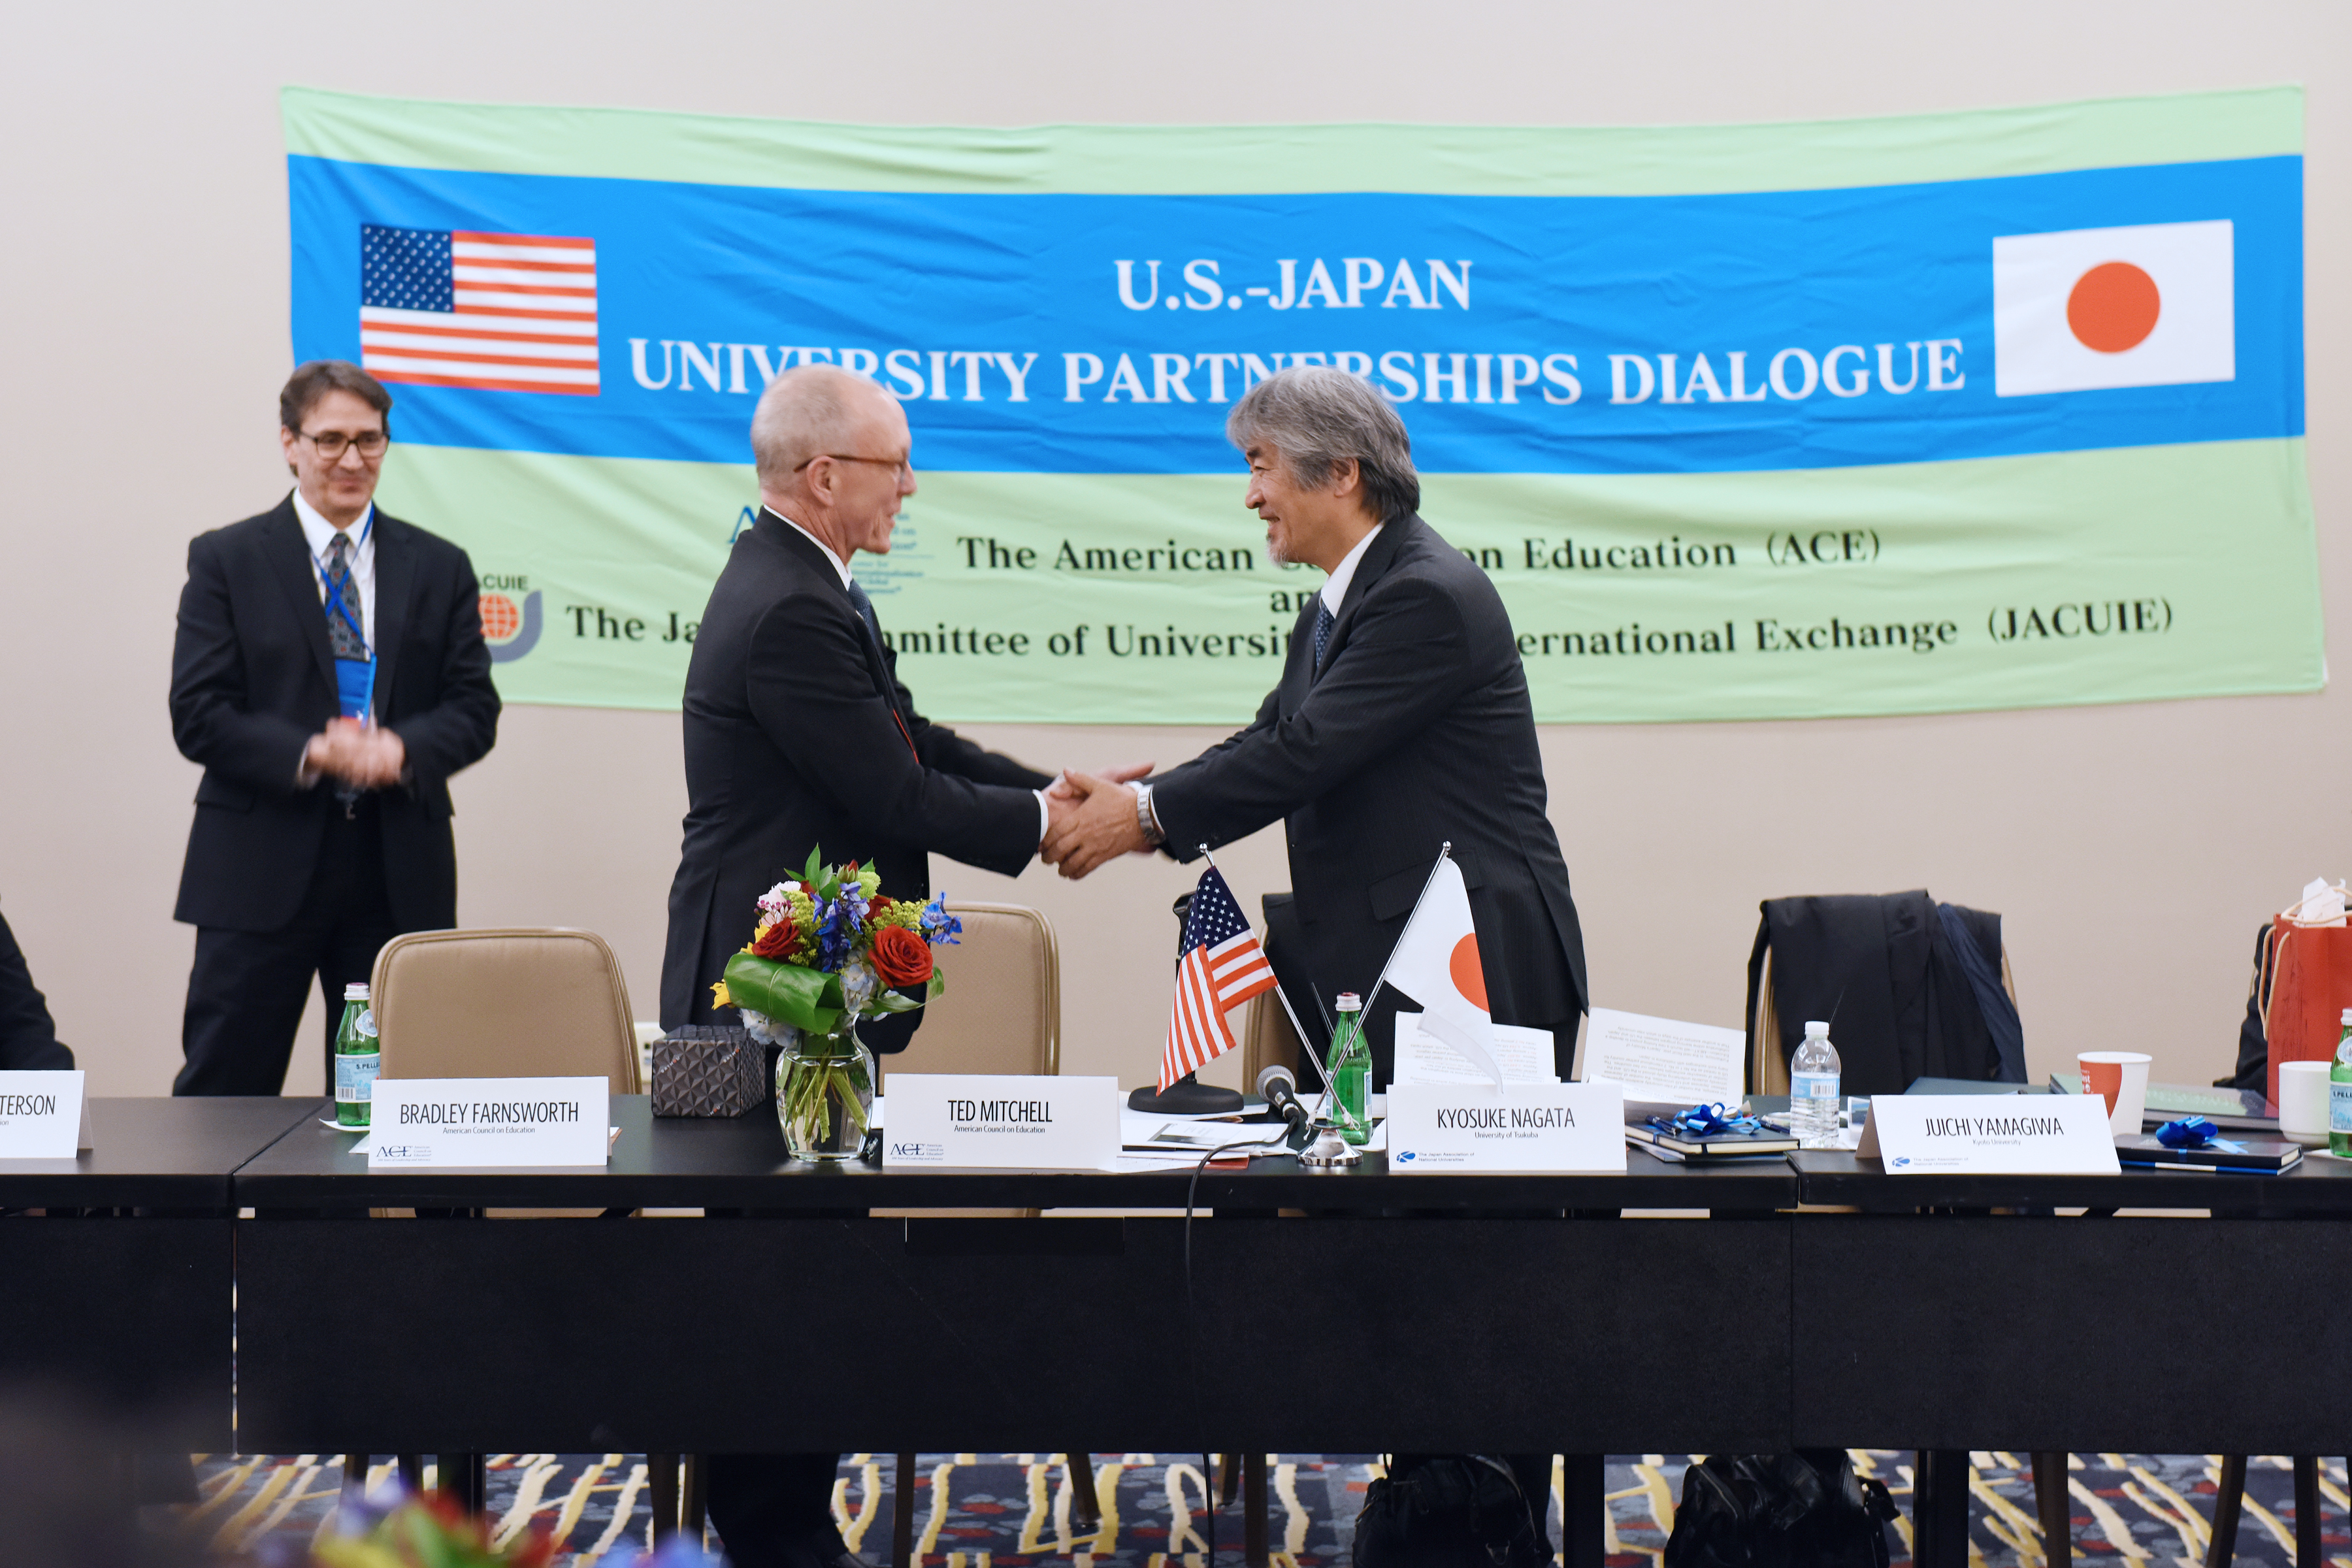 Picture of Ted Mitchell shaking hands with Juichi Yamagiwa.